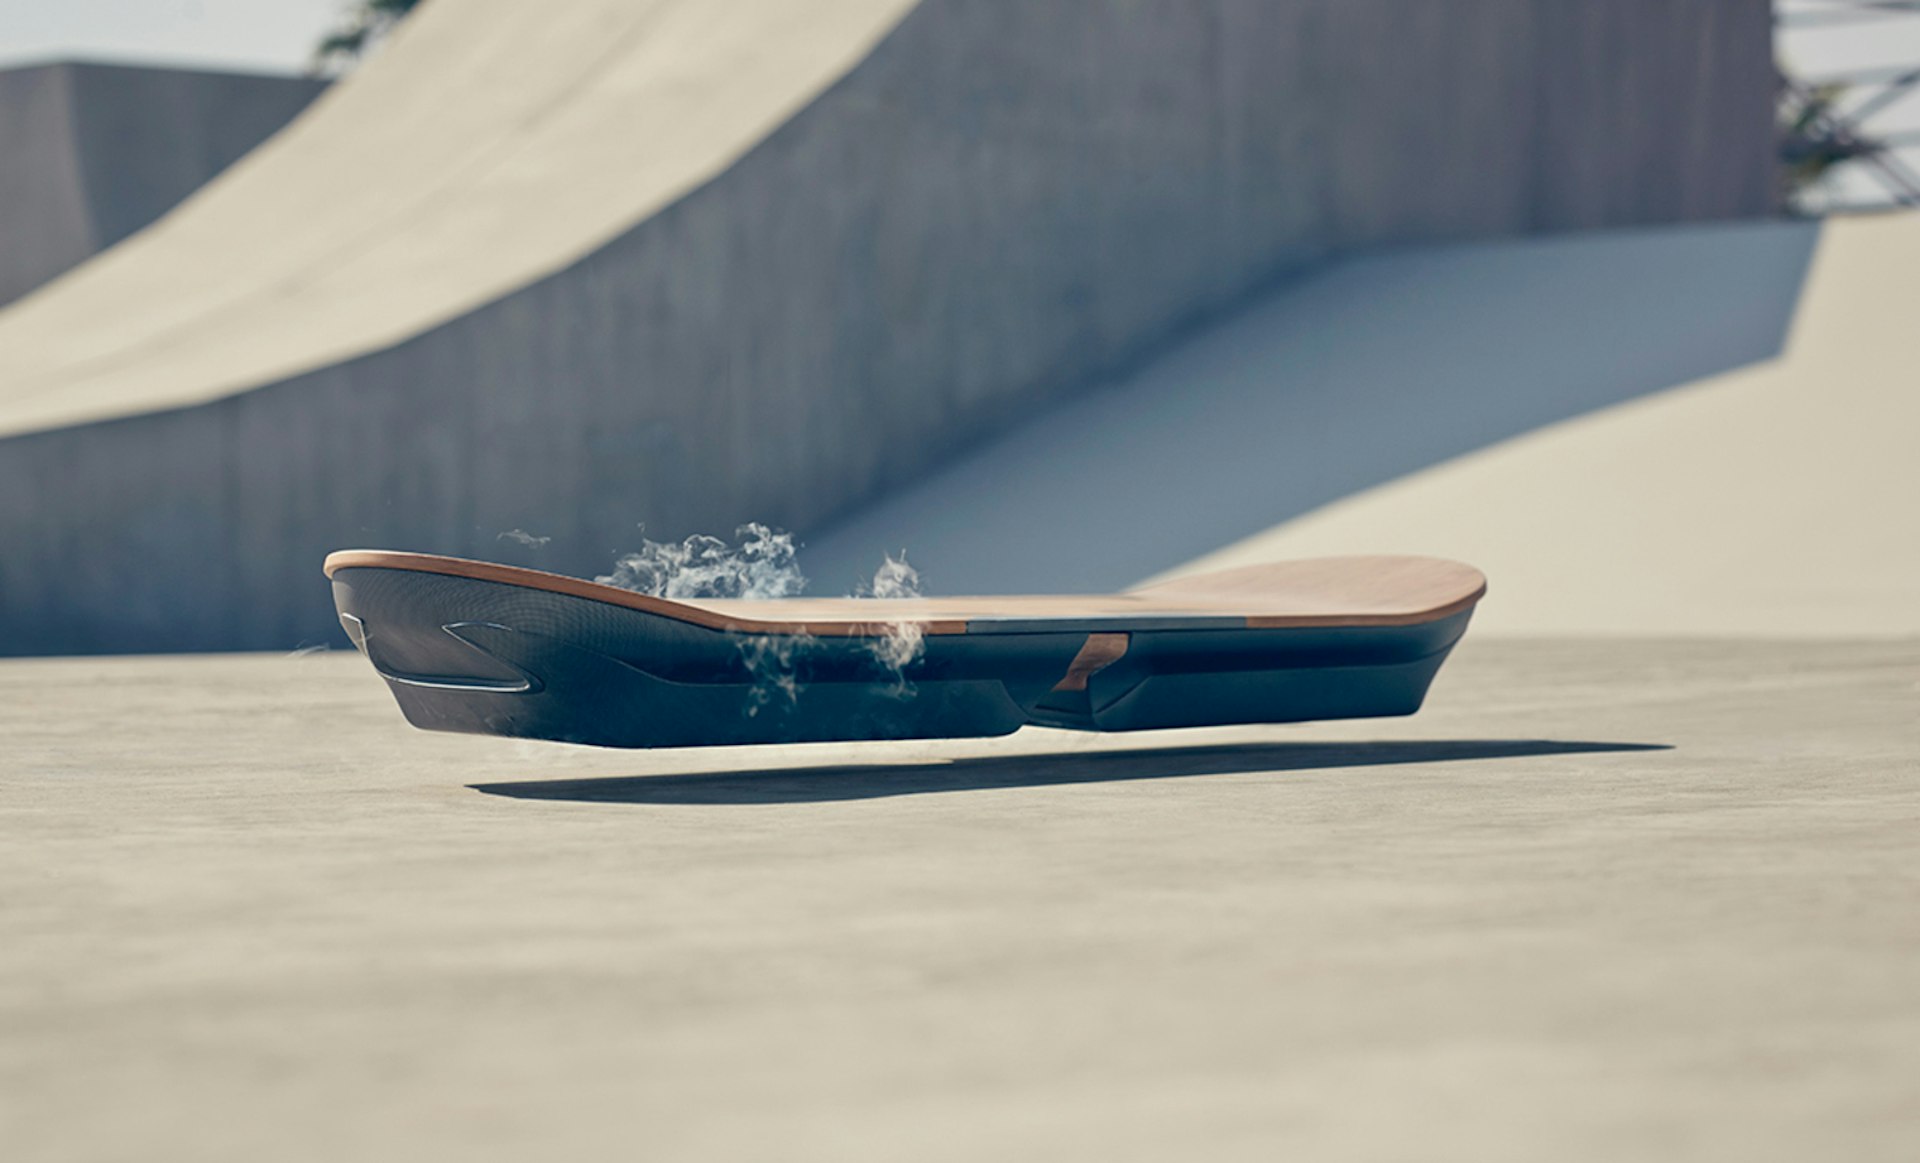 Lexus' hoverboard project is about to drop